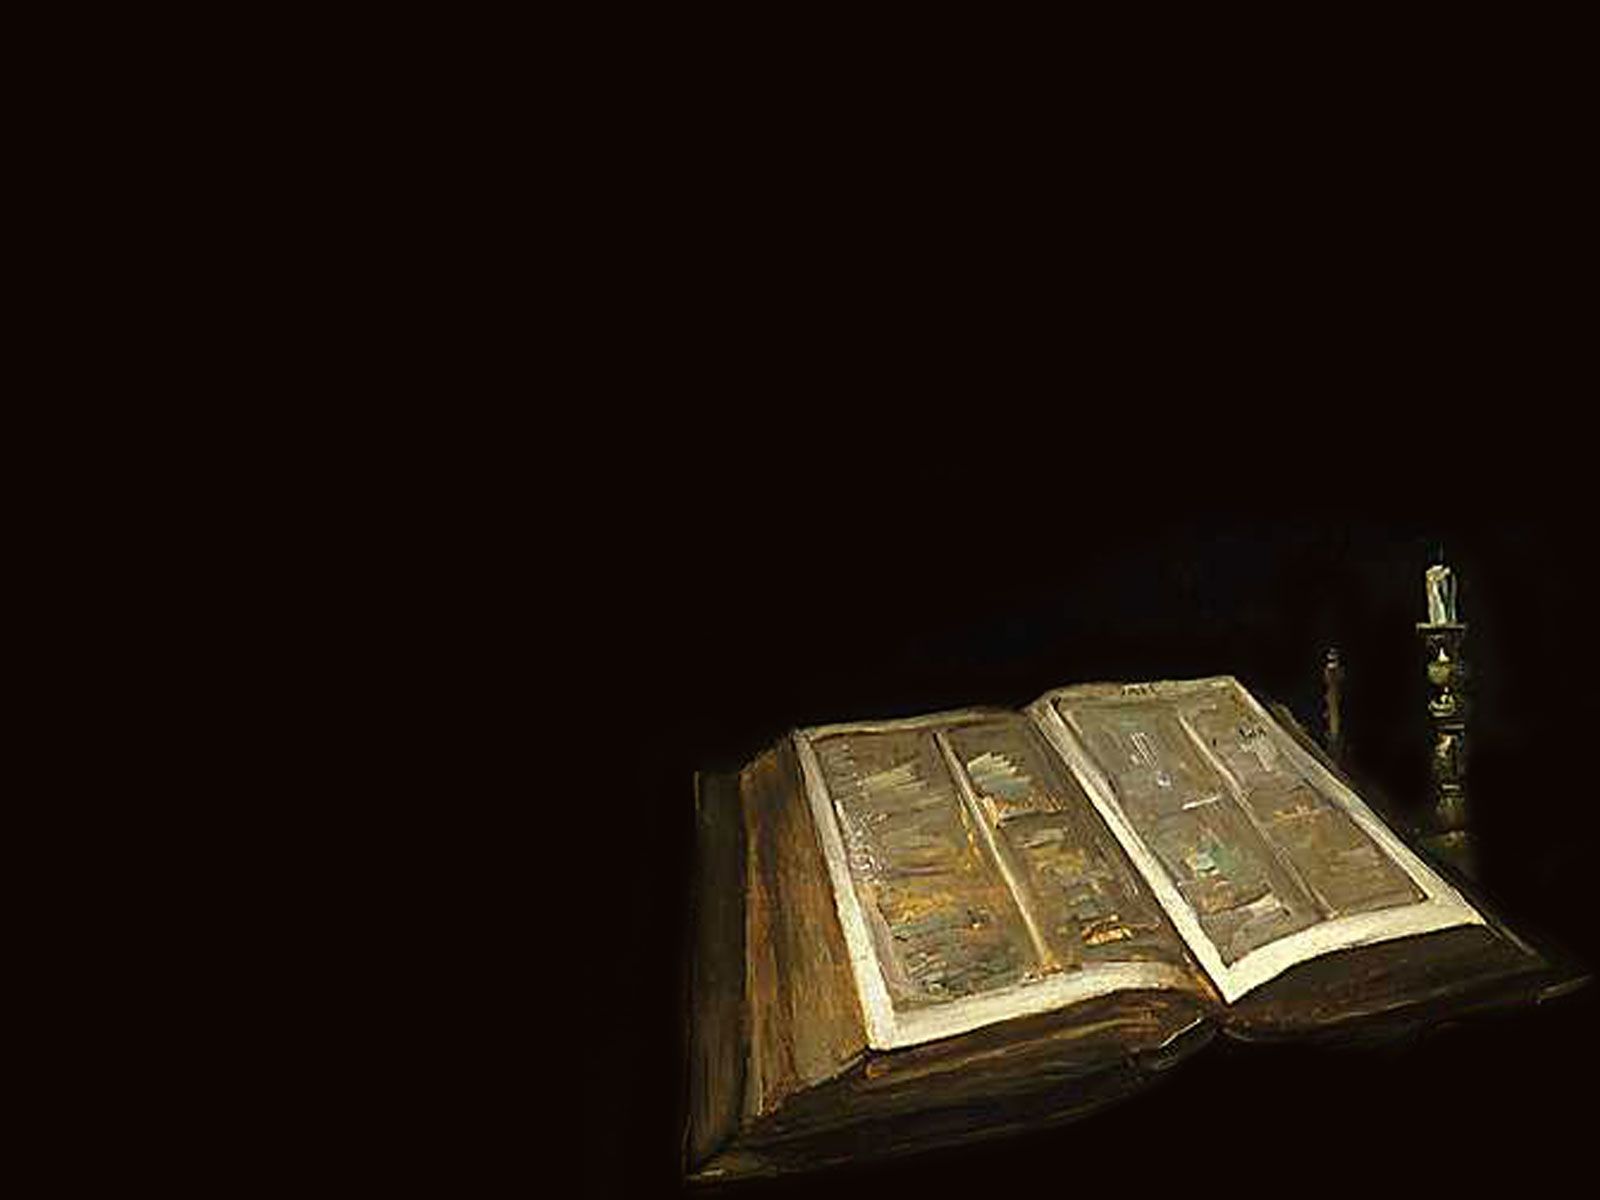 Holy Bible Ii Wallpaper Christian And Background